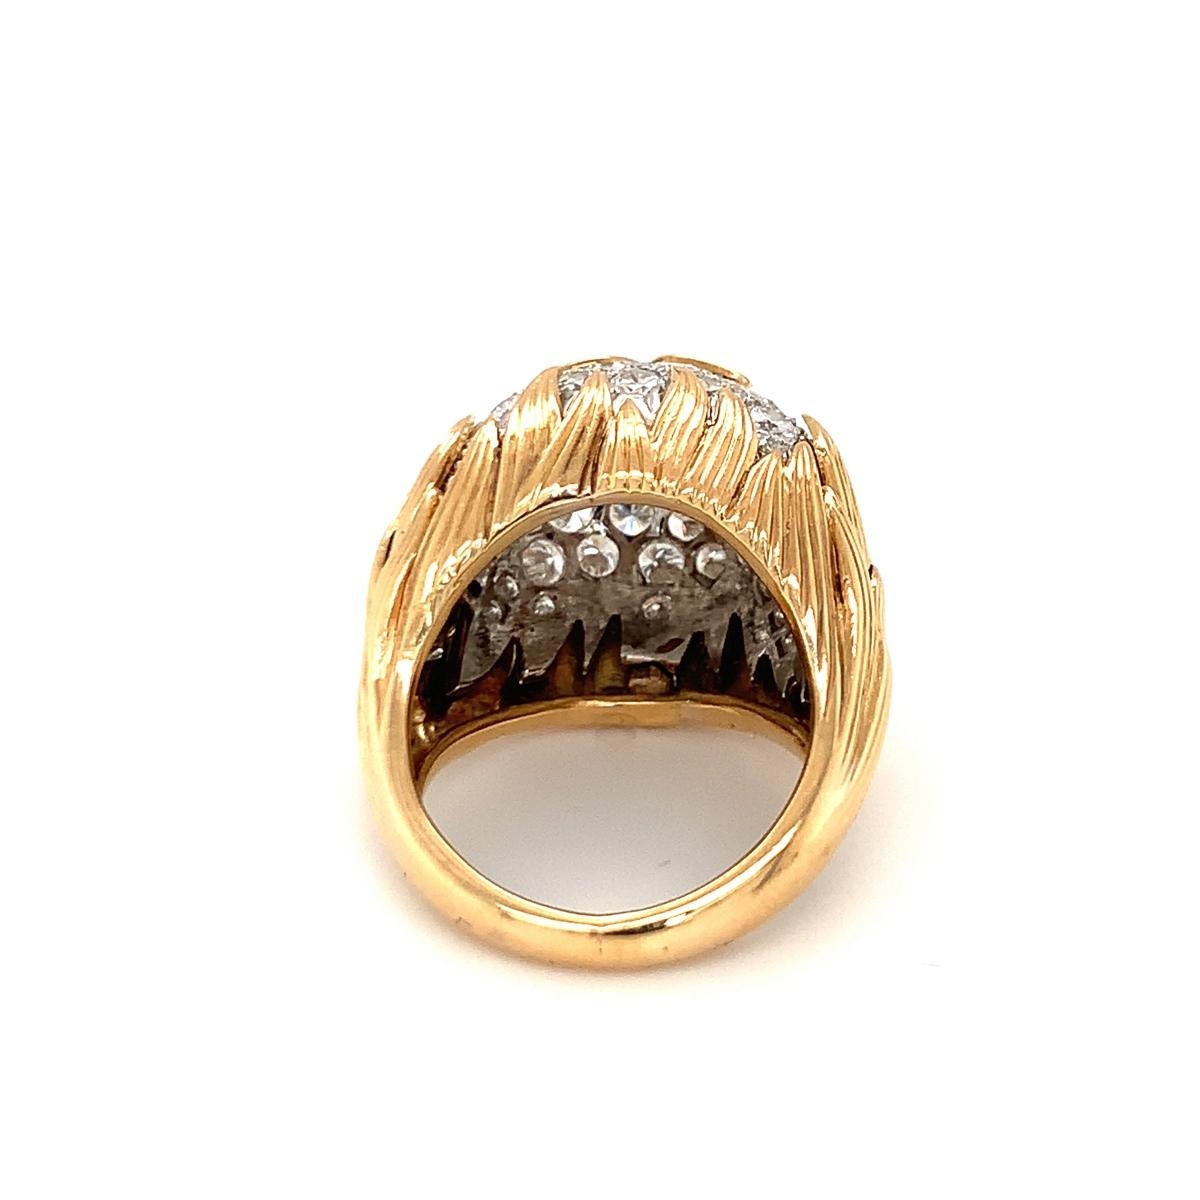 Diamond Pave Dome 18K Yellow Gold Ring, circa 1960s For Sale 2